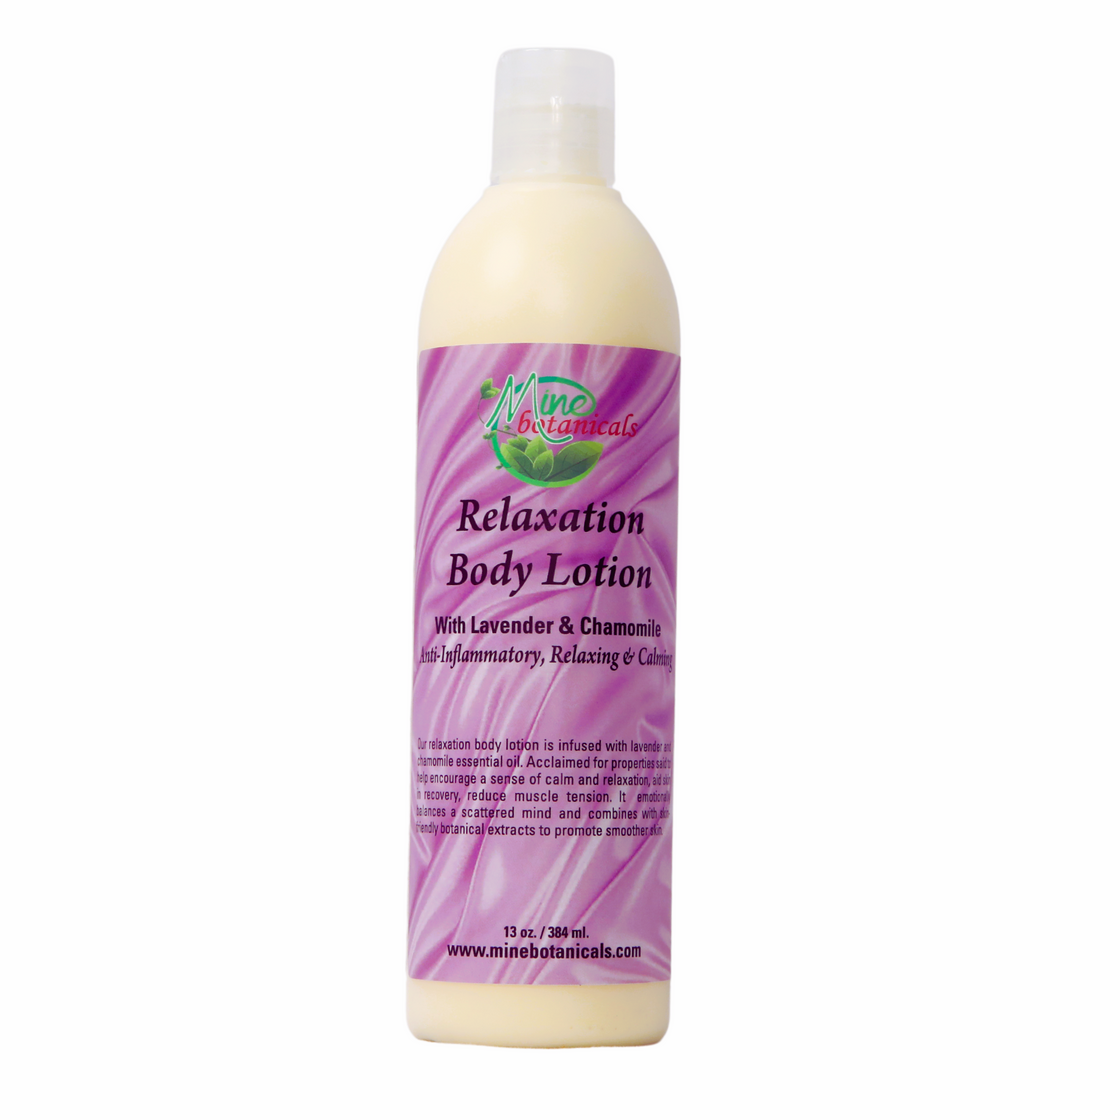 Relaxation Body Lotion